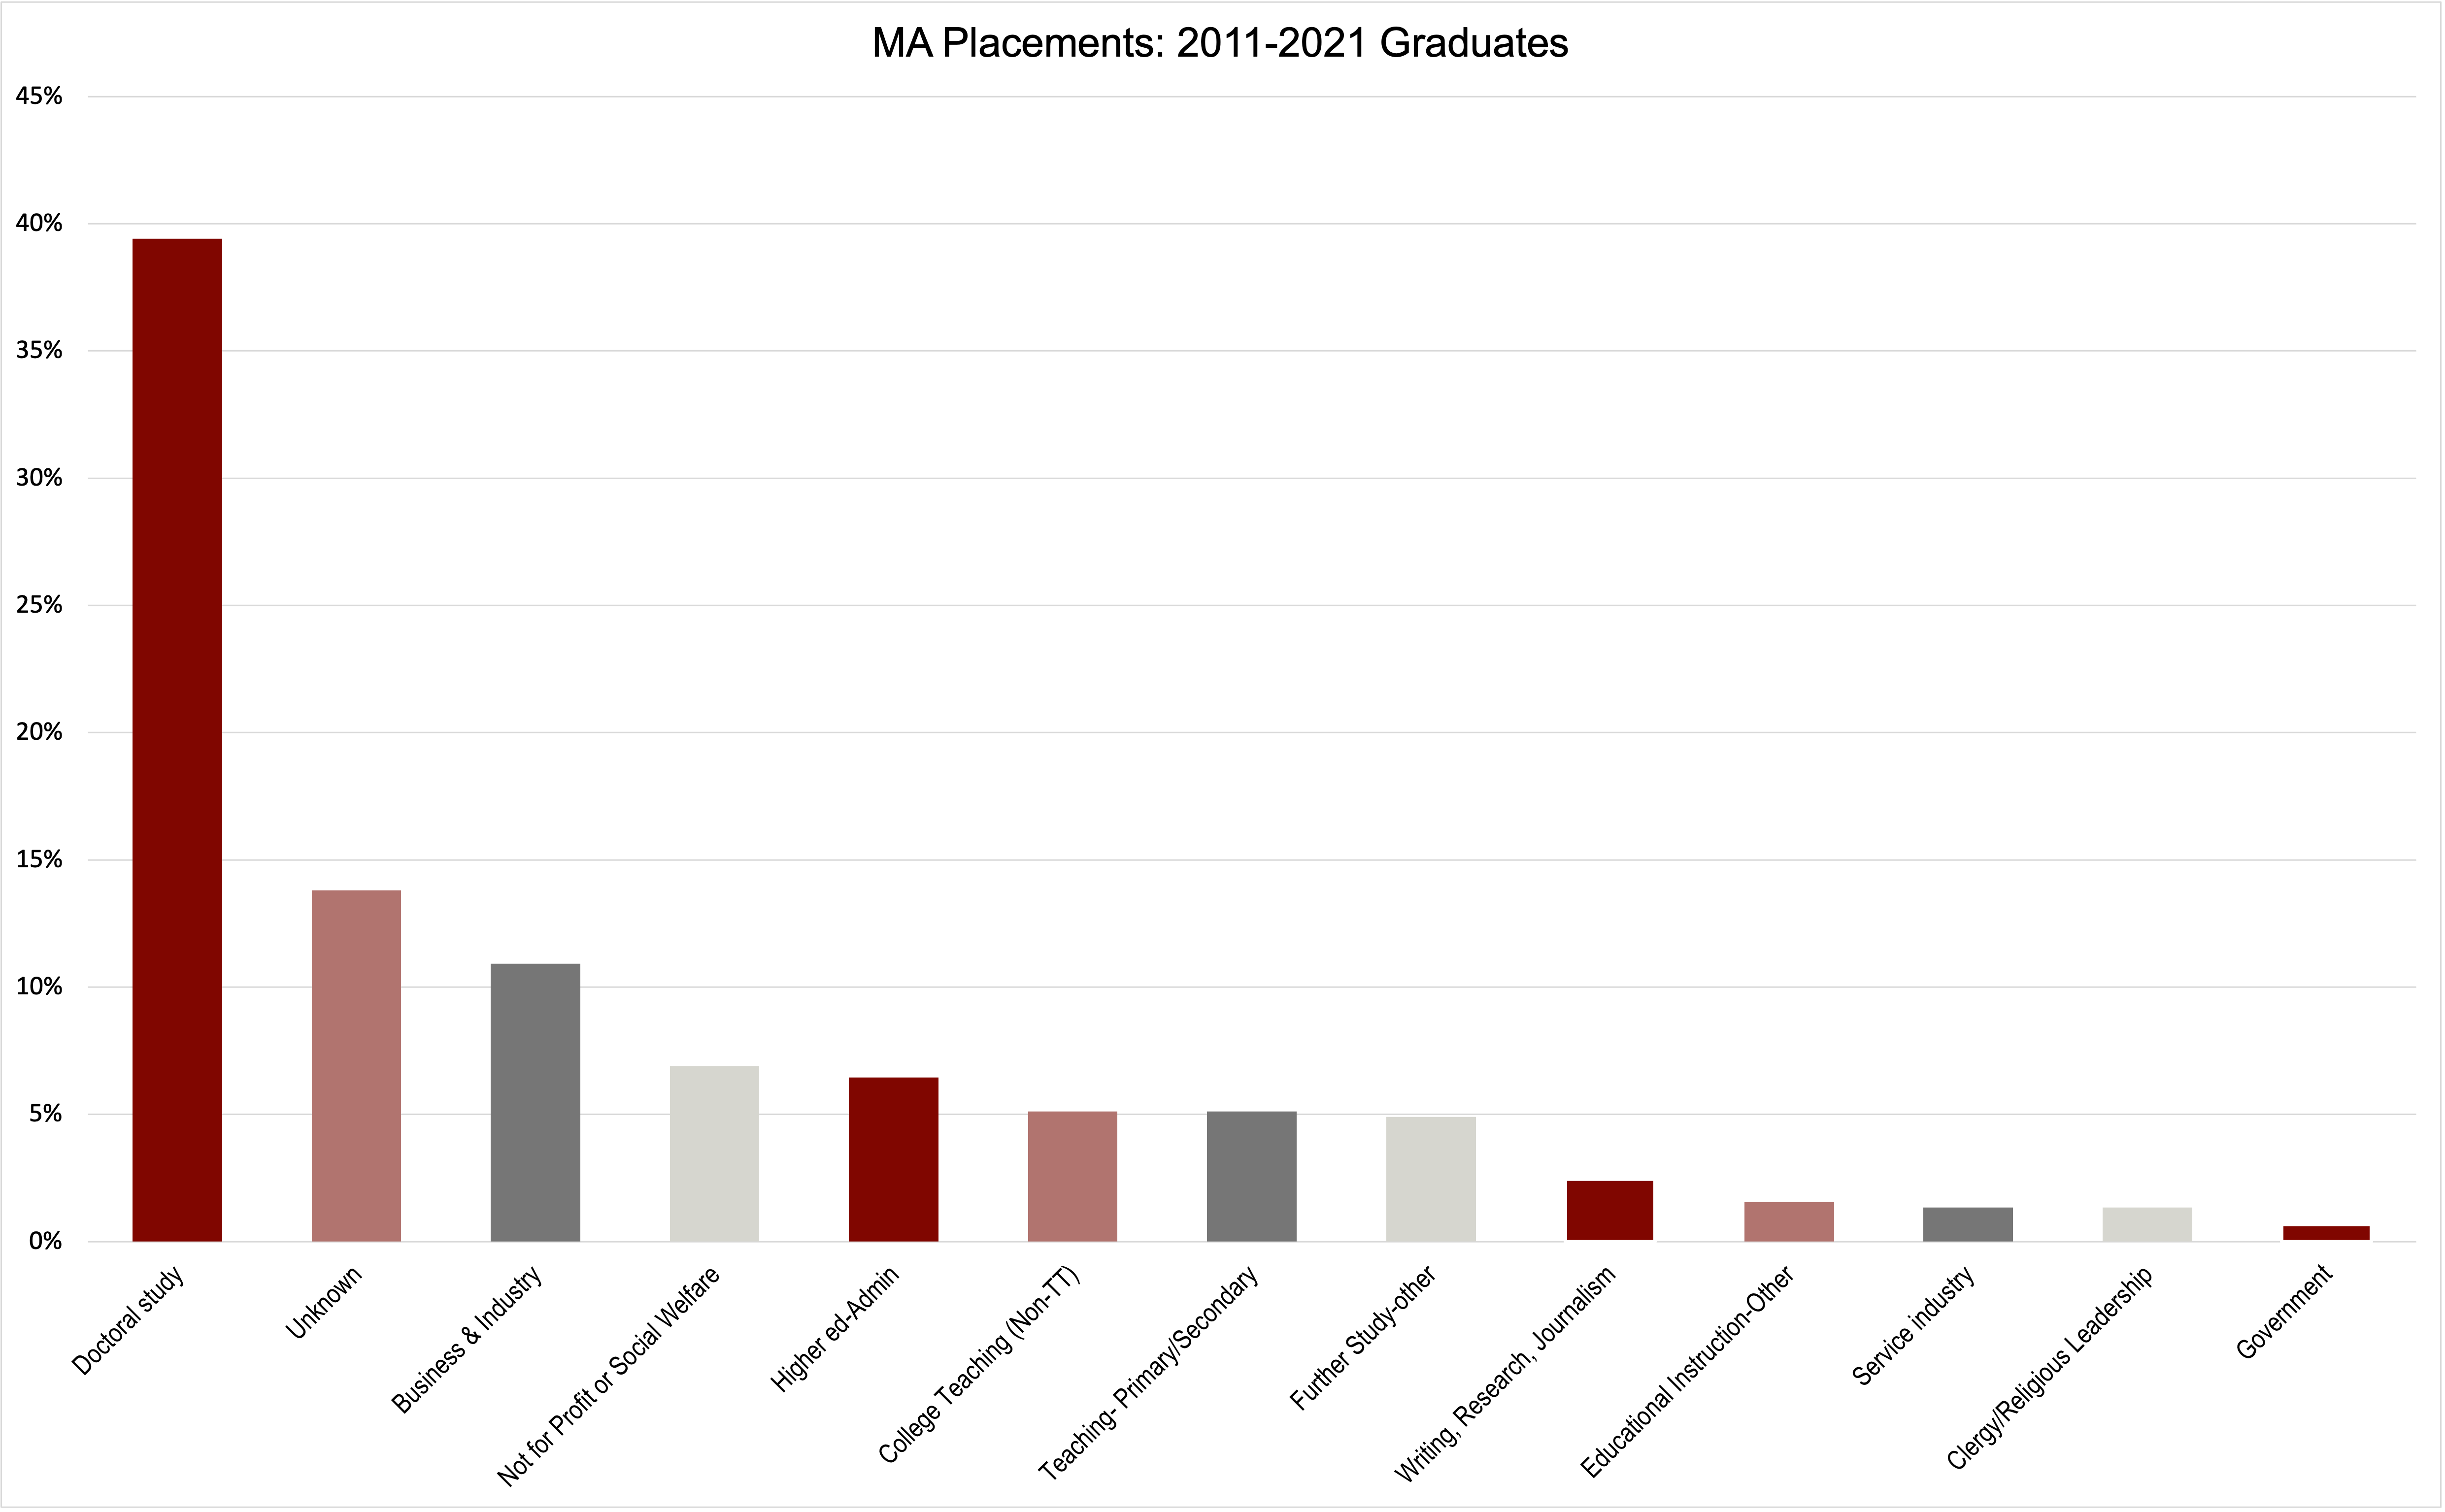 This graph shows the placement of MA graduates from 2011-2021. About 39% went on to doctoral study, 13% is unknown, 11% went into business & industry, 7% into not-for-profit or social welfare, 7% into higher-ed admin, 5% into non-tenure track college teaching, 5% taught primary or secondary school, 5% to other further studies, 3% into writing, research, and journalism, 2% to other educational instruction, 2% into the service industry, 2% into clergy/religious leadership, and 1% into government.